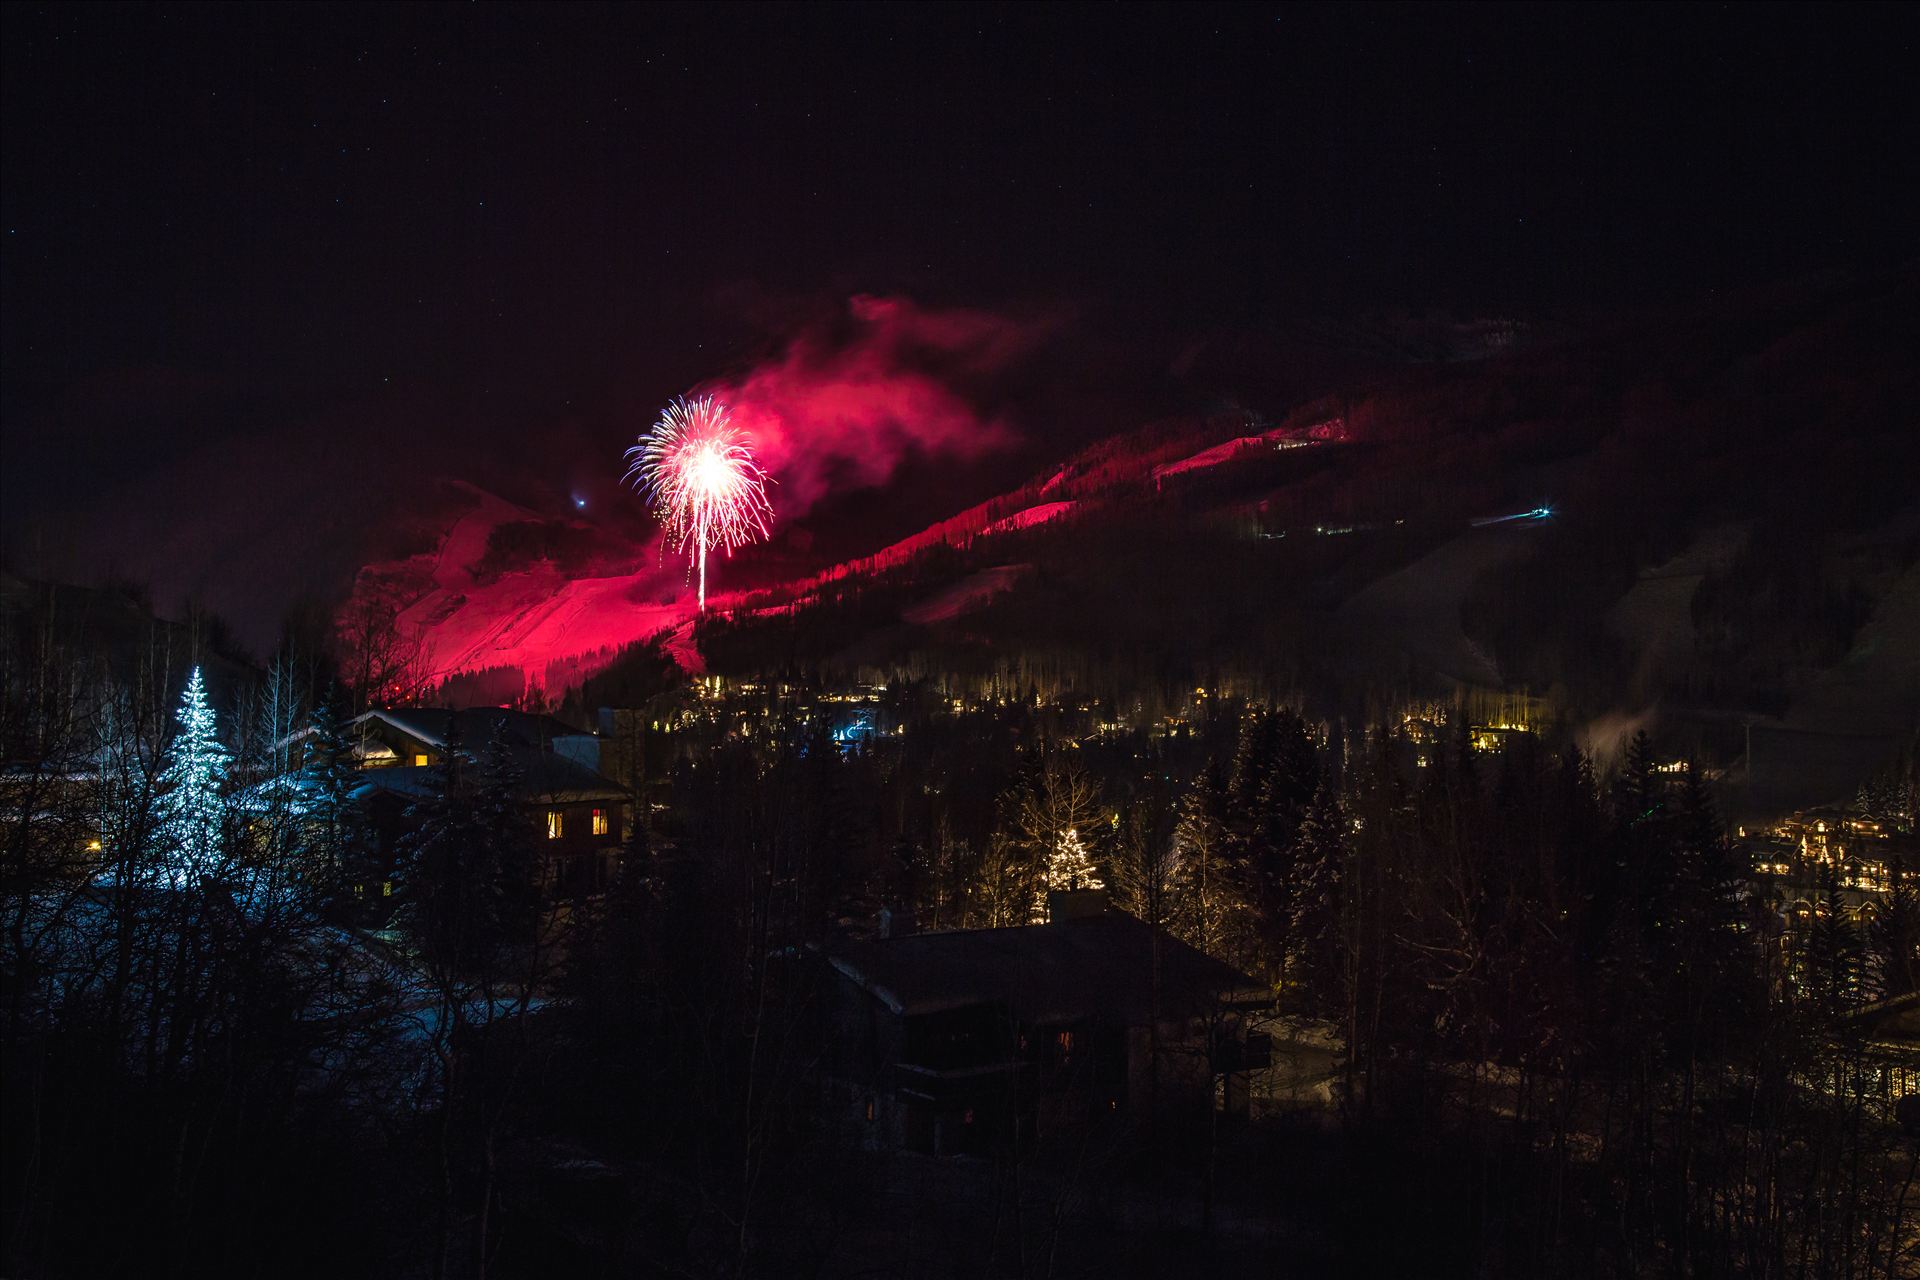 New Years Eve in Vail - A frigid end to 2015 in Vail, Colorado. by Scott Smith Photos